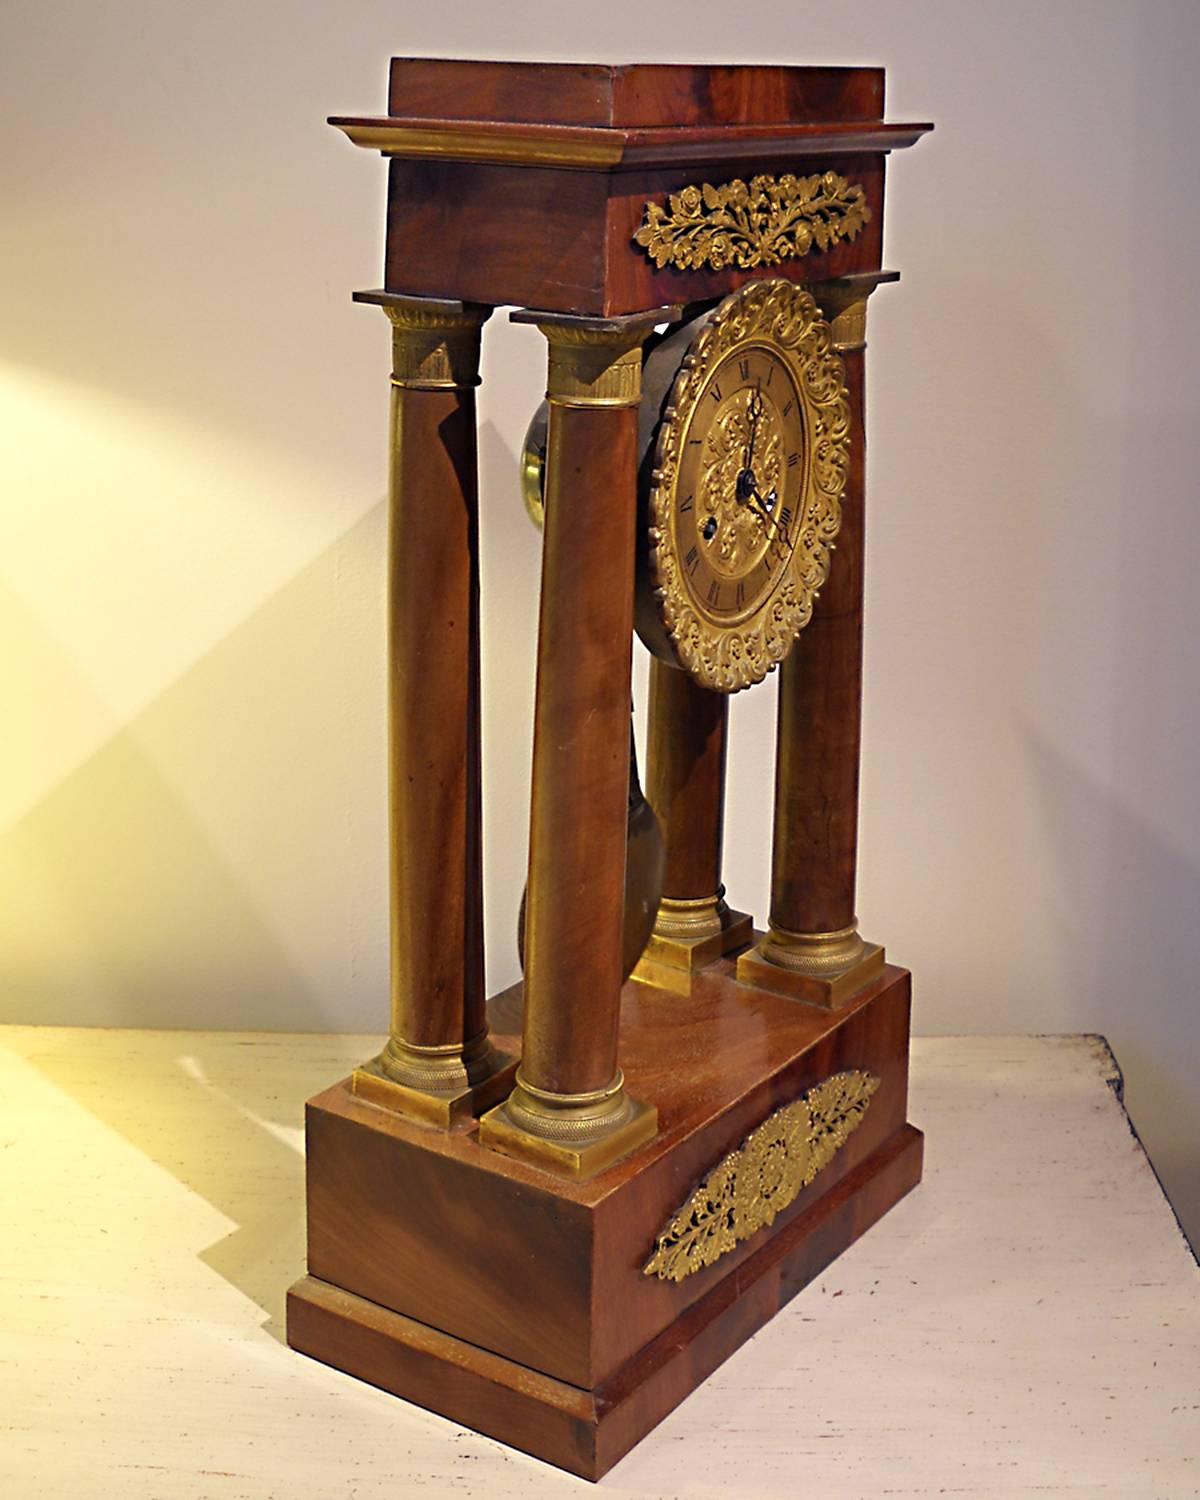 French Charles X portico clock with flame mahogany veneers and gilt bronze mounts. Supported by four Egyptian columns. Roman counters on the gilt face and center and a brass drop pendulum, 19th century. (Price reduced from $3,200.).